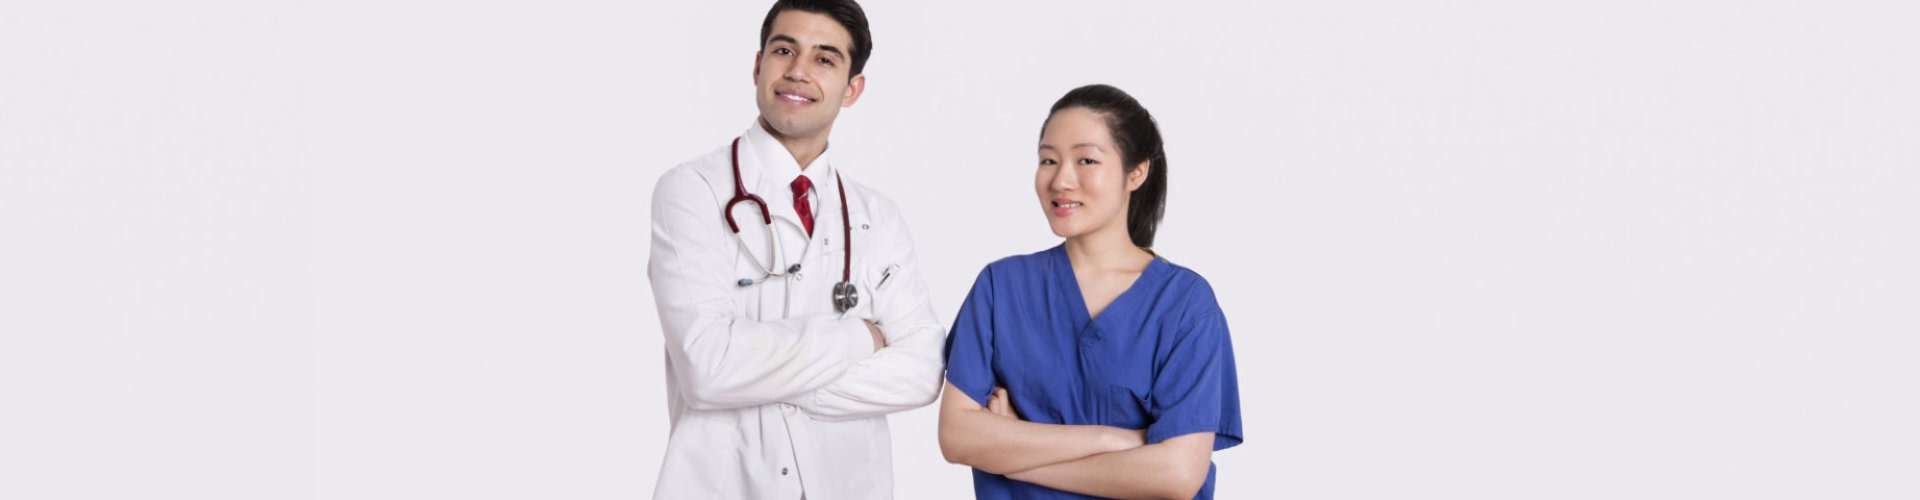 male doctor and female nurse smiling